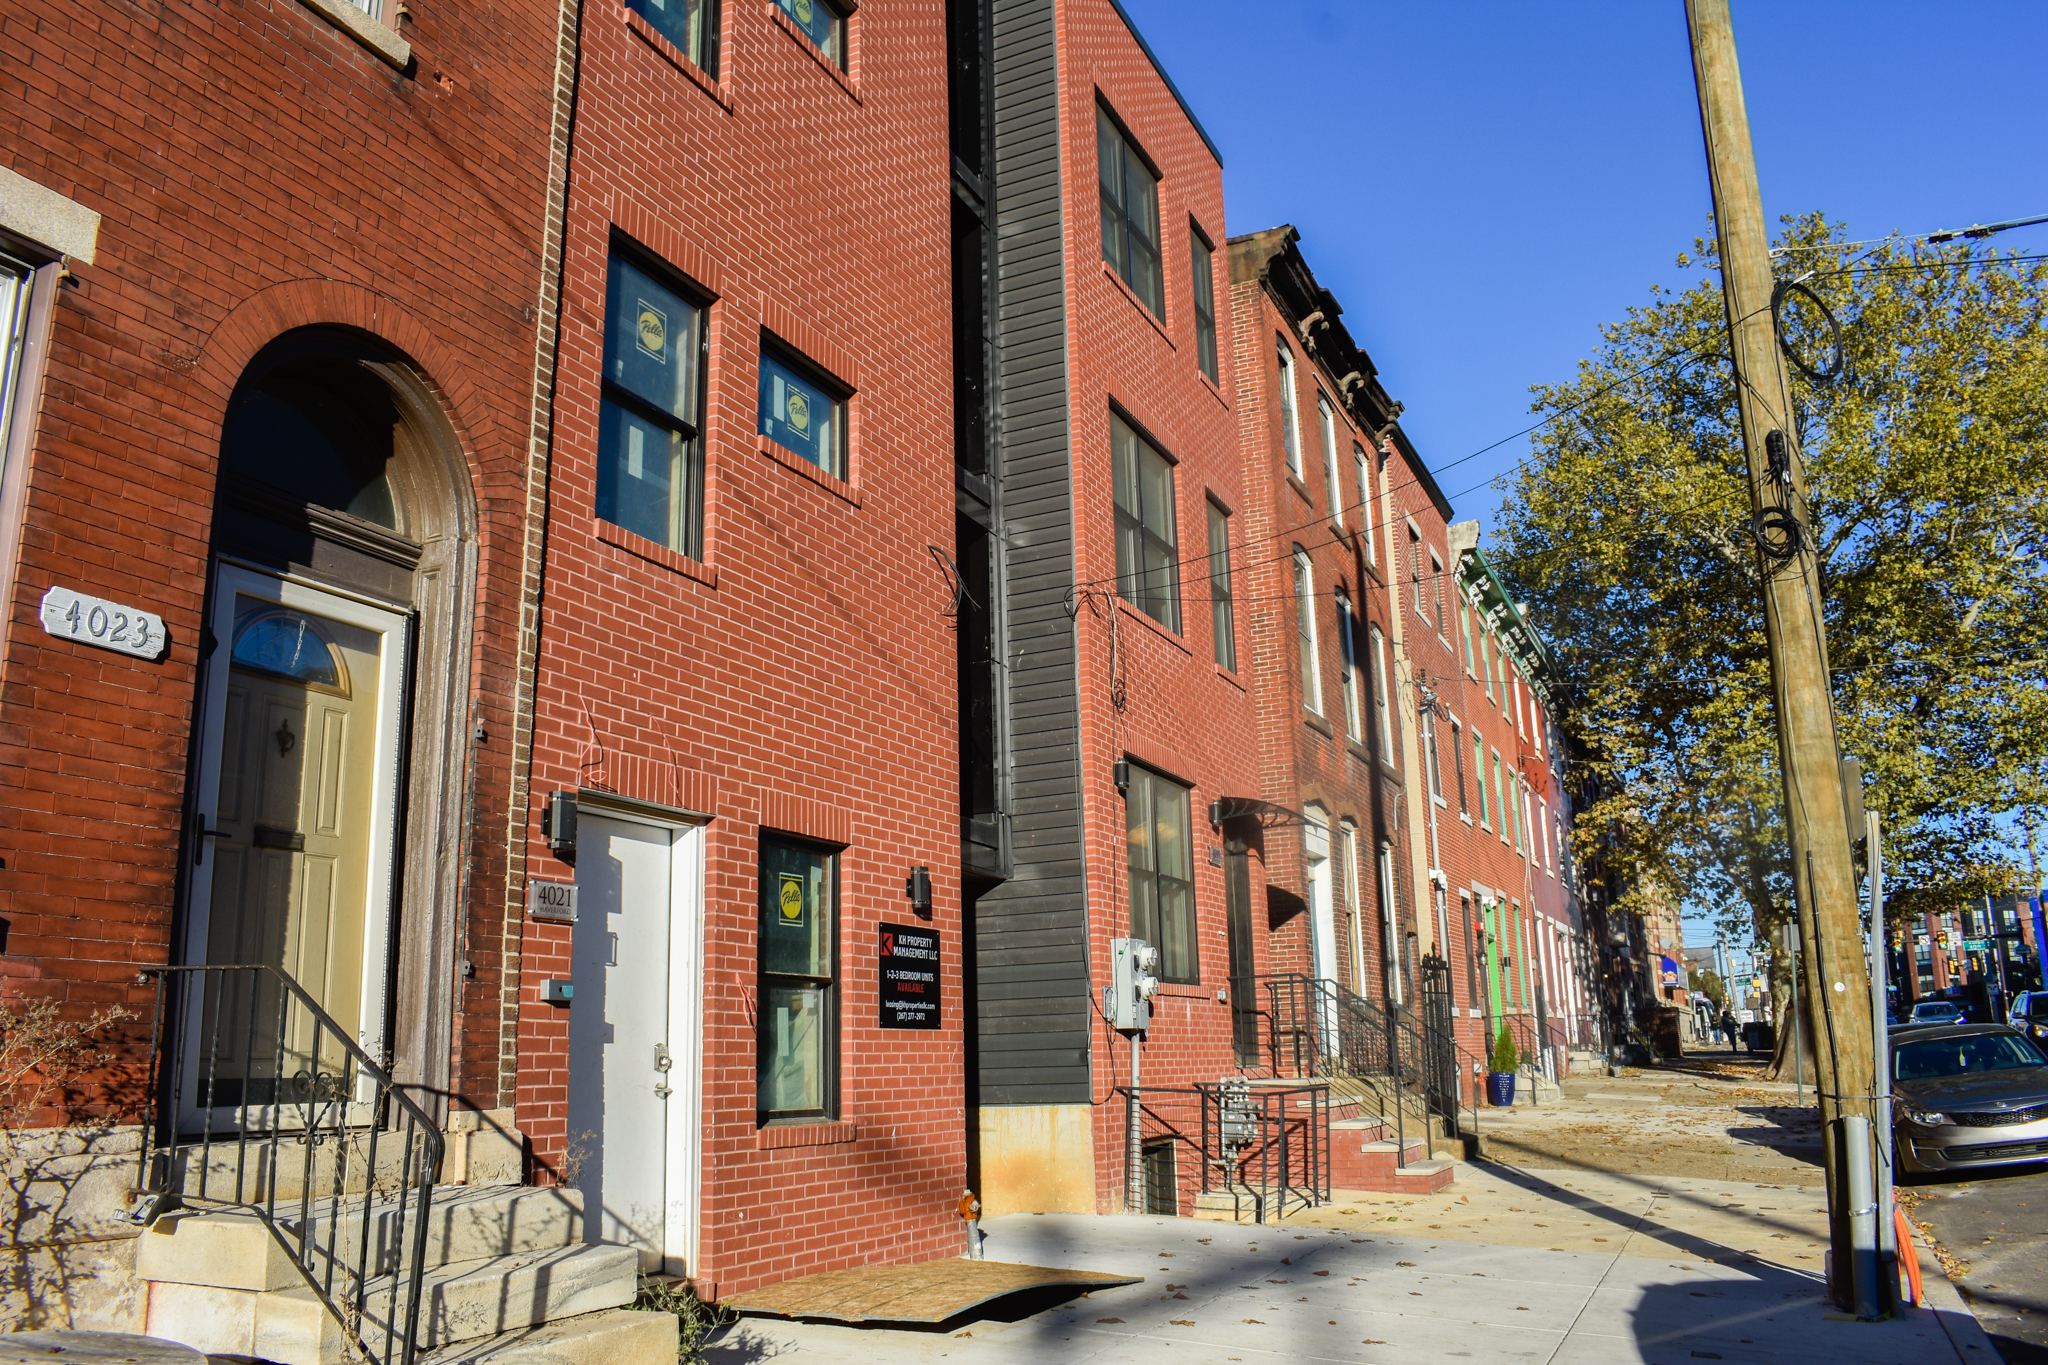 4019-21 Haverford Avenue. Photo by Jamie Meller. October 2022